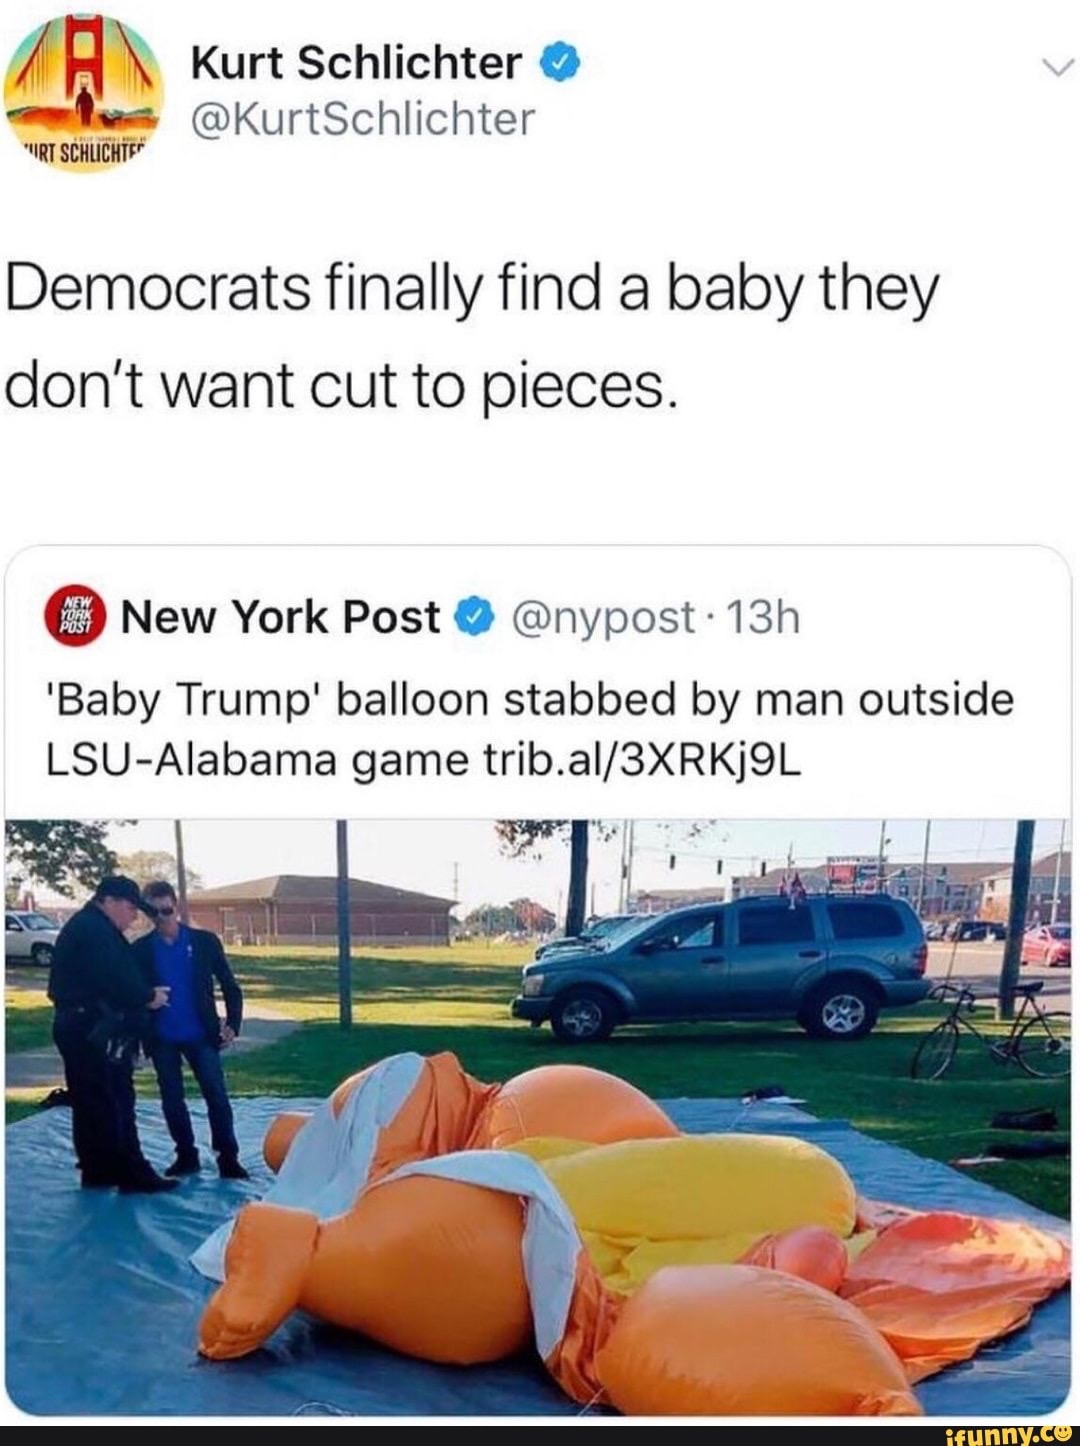 baby trump balloon slashed - A Kurt Schlichter "Irt Schlichte Democrats finally find a baby they don't want cut to pieces. New York Post 13h 'Baby Trump' balloon stabbed by man outside LsuAlabama game trib.al3XRKJOL ifunny.co